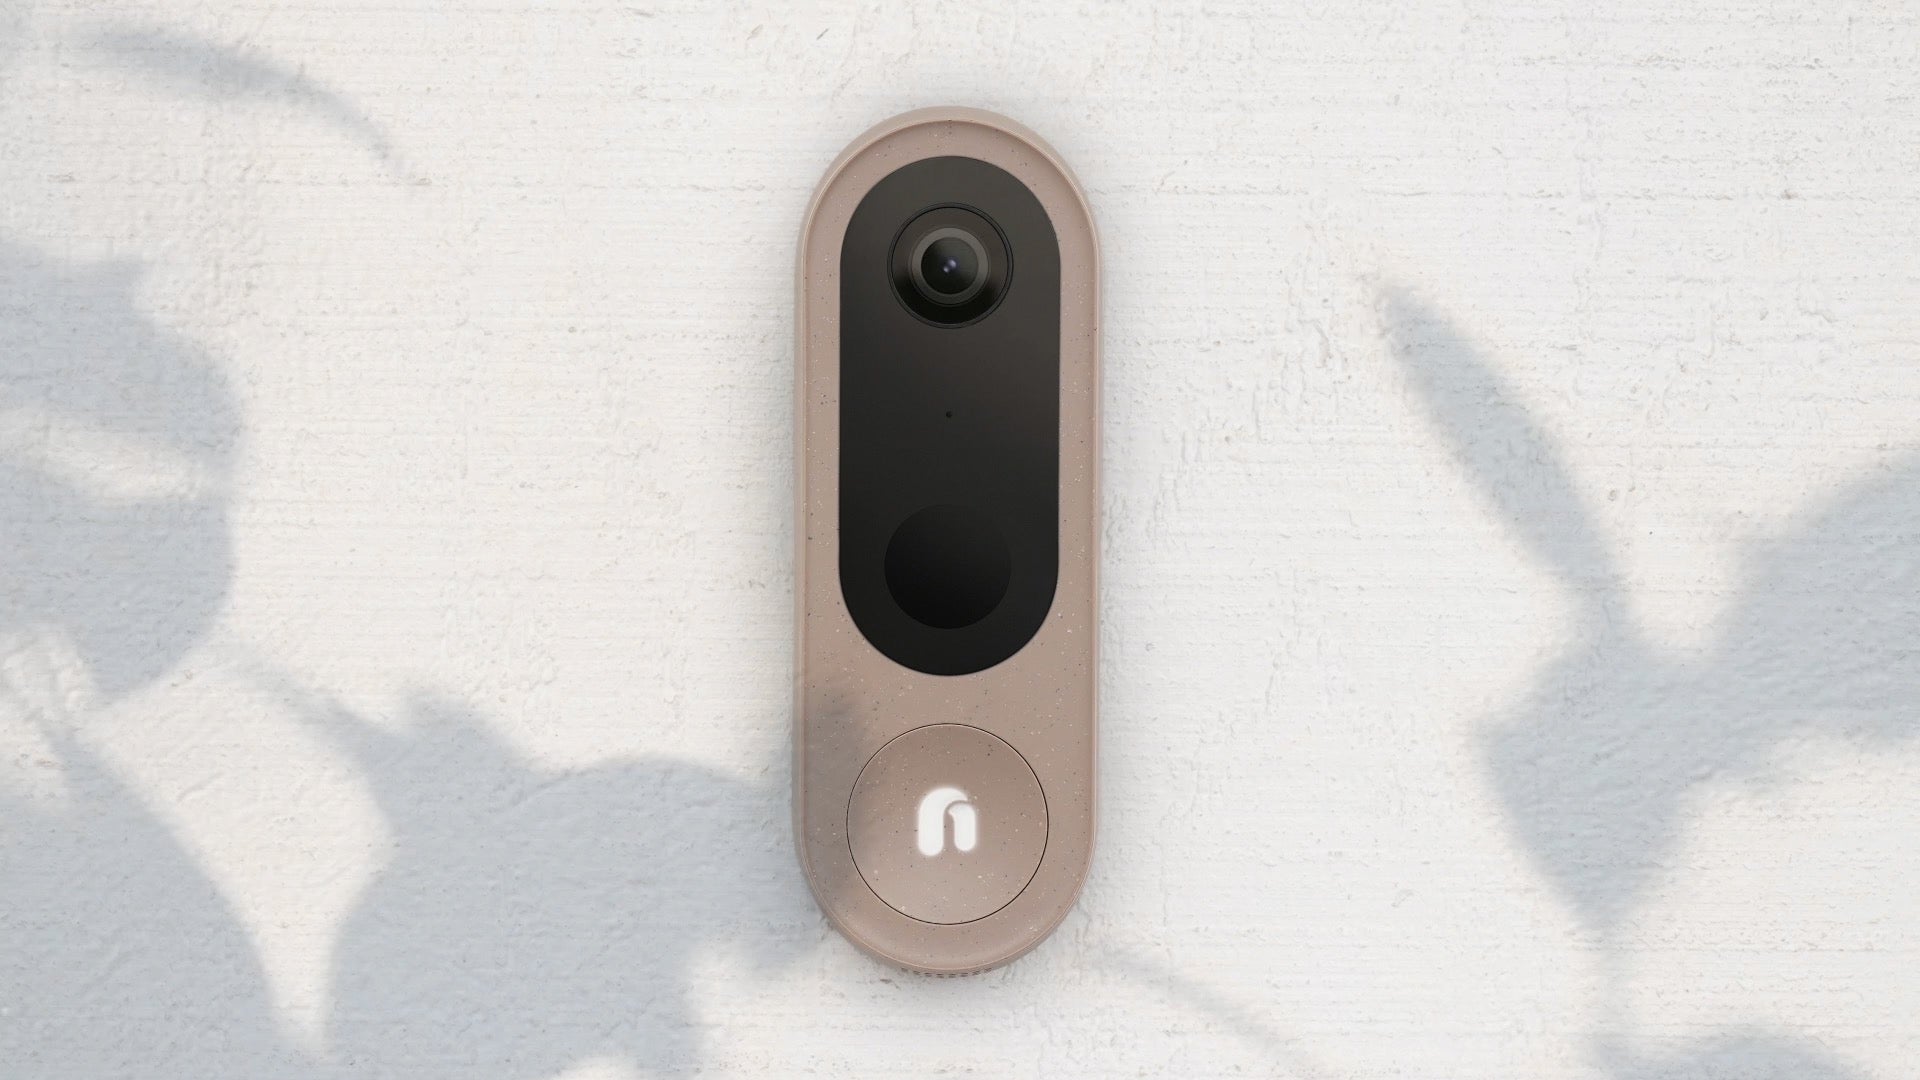 "An Incredible Little Camera For the Price," Says CG Mag of Nooie 360 Cam